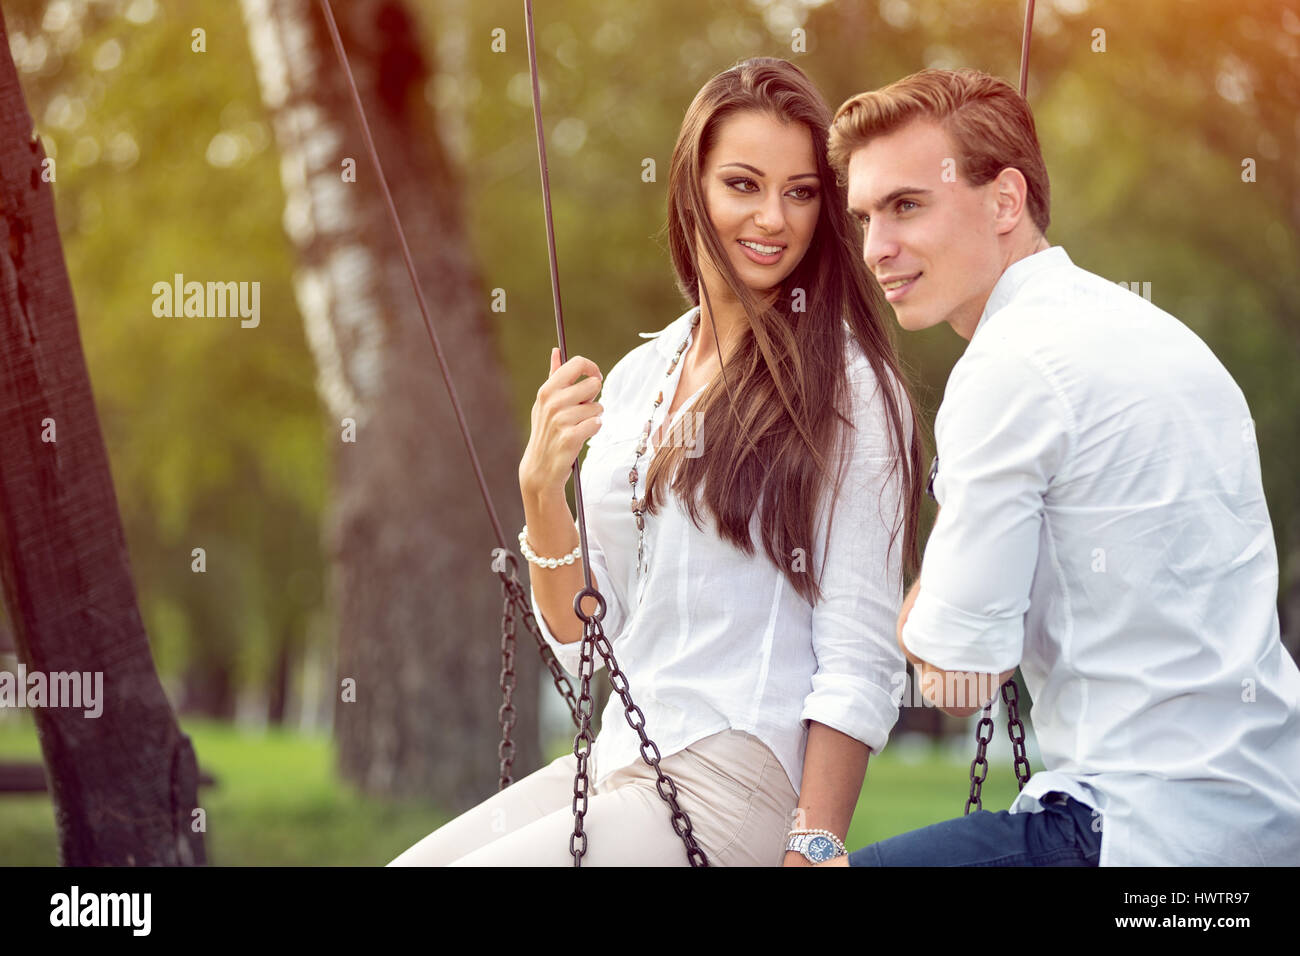 Young couple in love on swings, outdoor Stock Photo